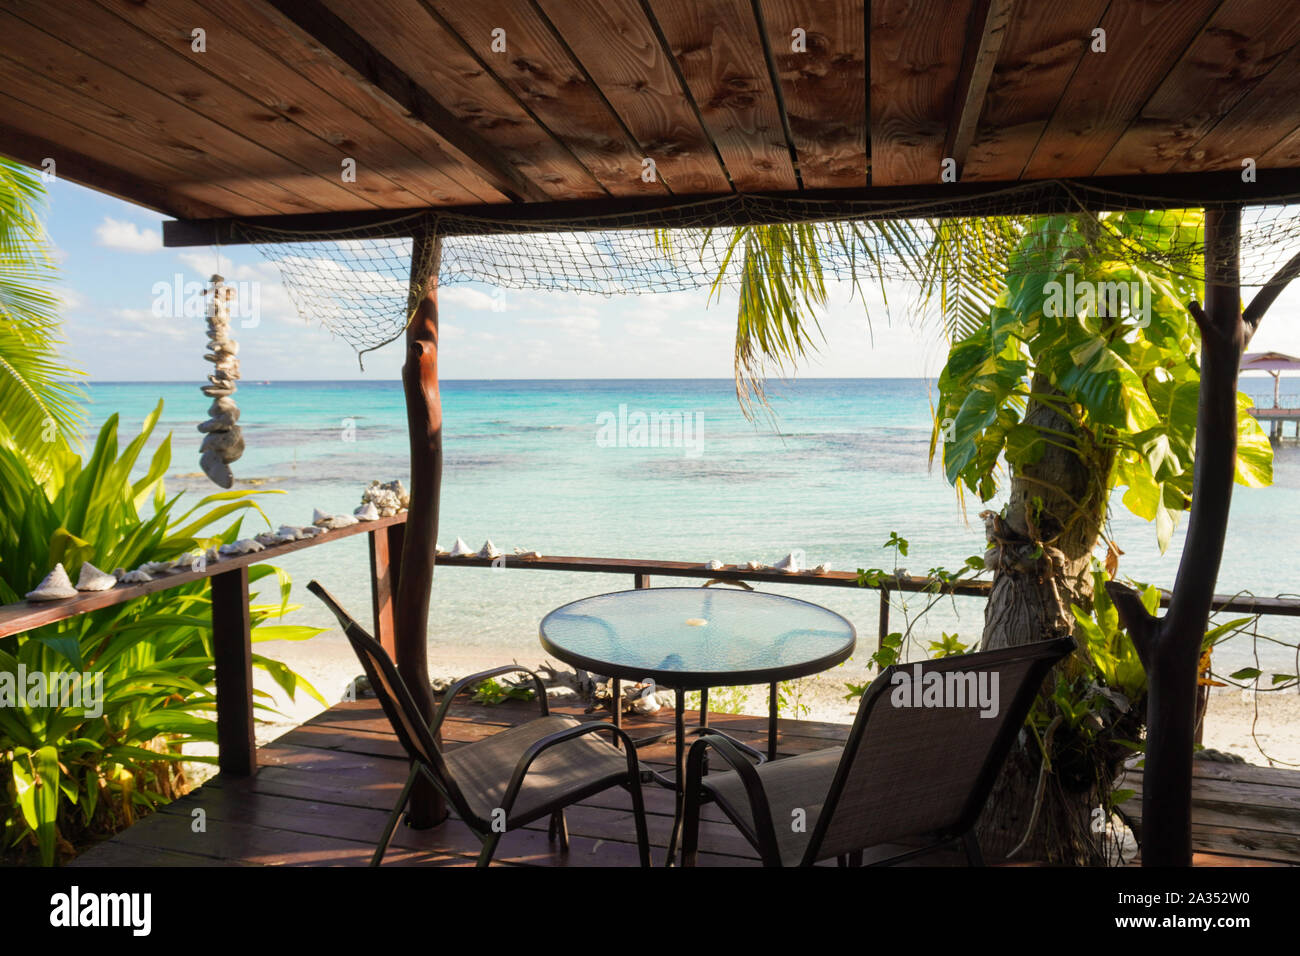 View of a blue tropical lagoon from the wooden deck of a bungalow with a table and chairs and framed by palm trees and seashells Stock Photo